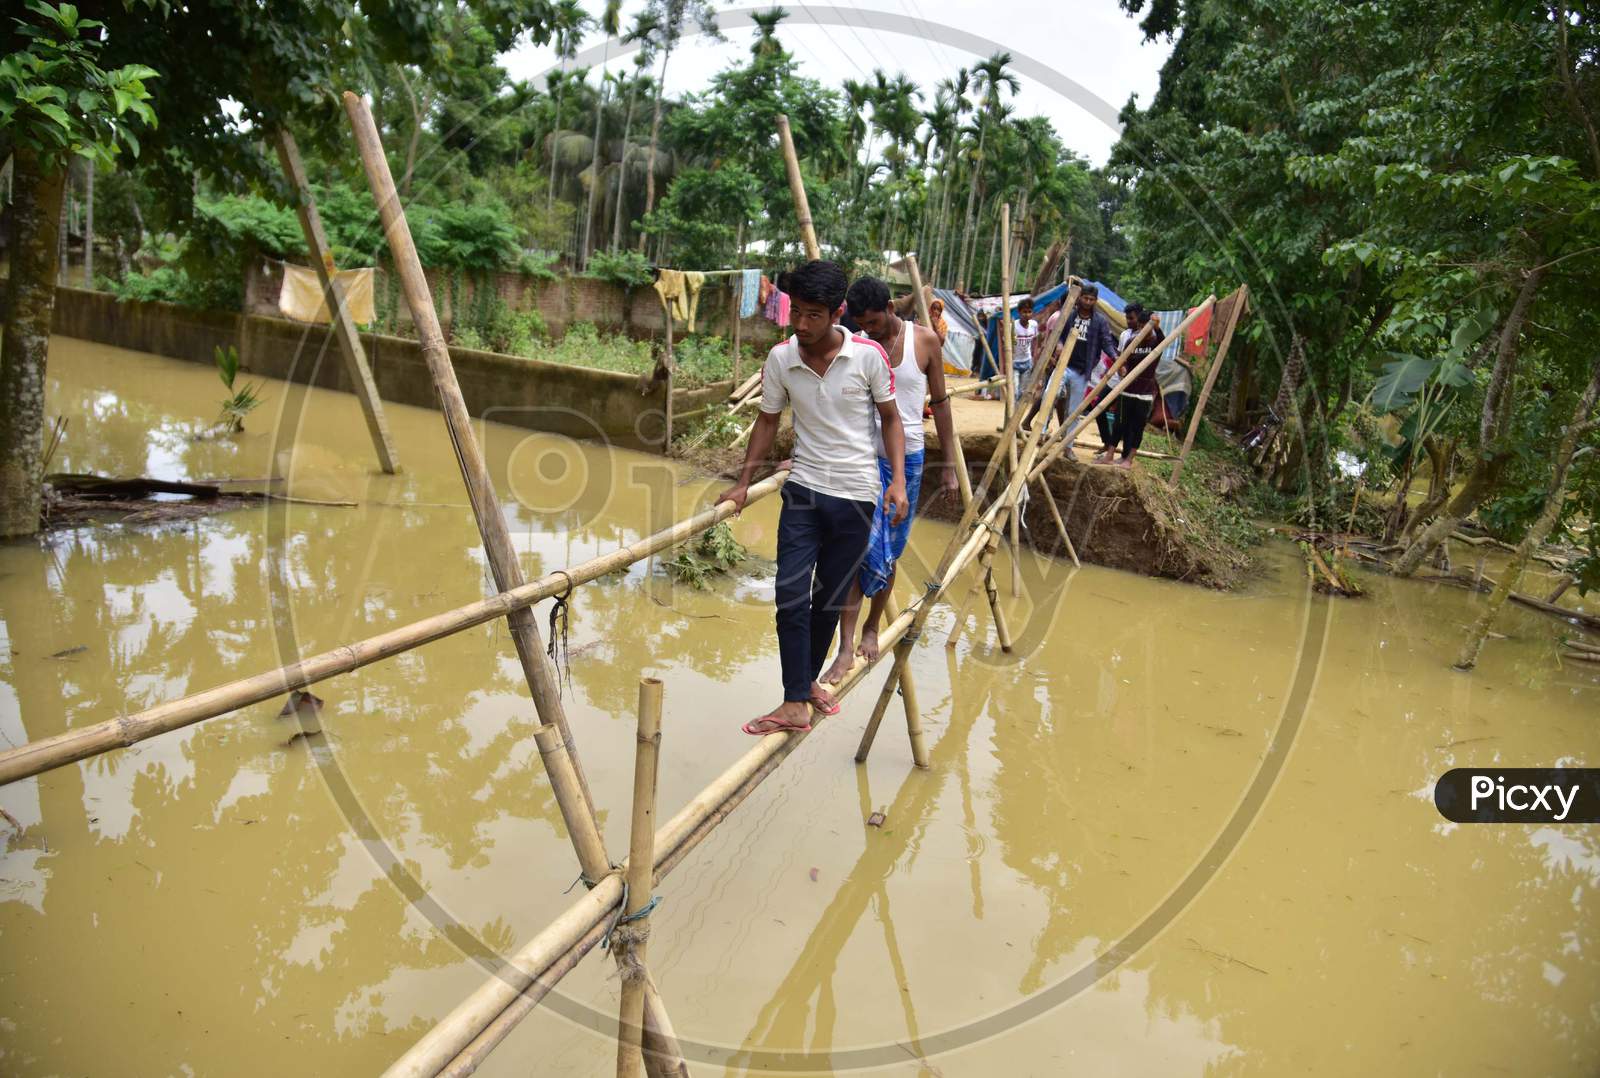 Villagers Use A Makeshift Bamboo Bridge After A Road Washed Out By Flood Water In Hojai District Of Assam On May 30,2020.